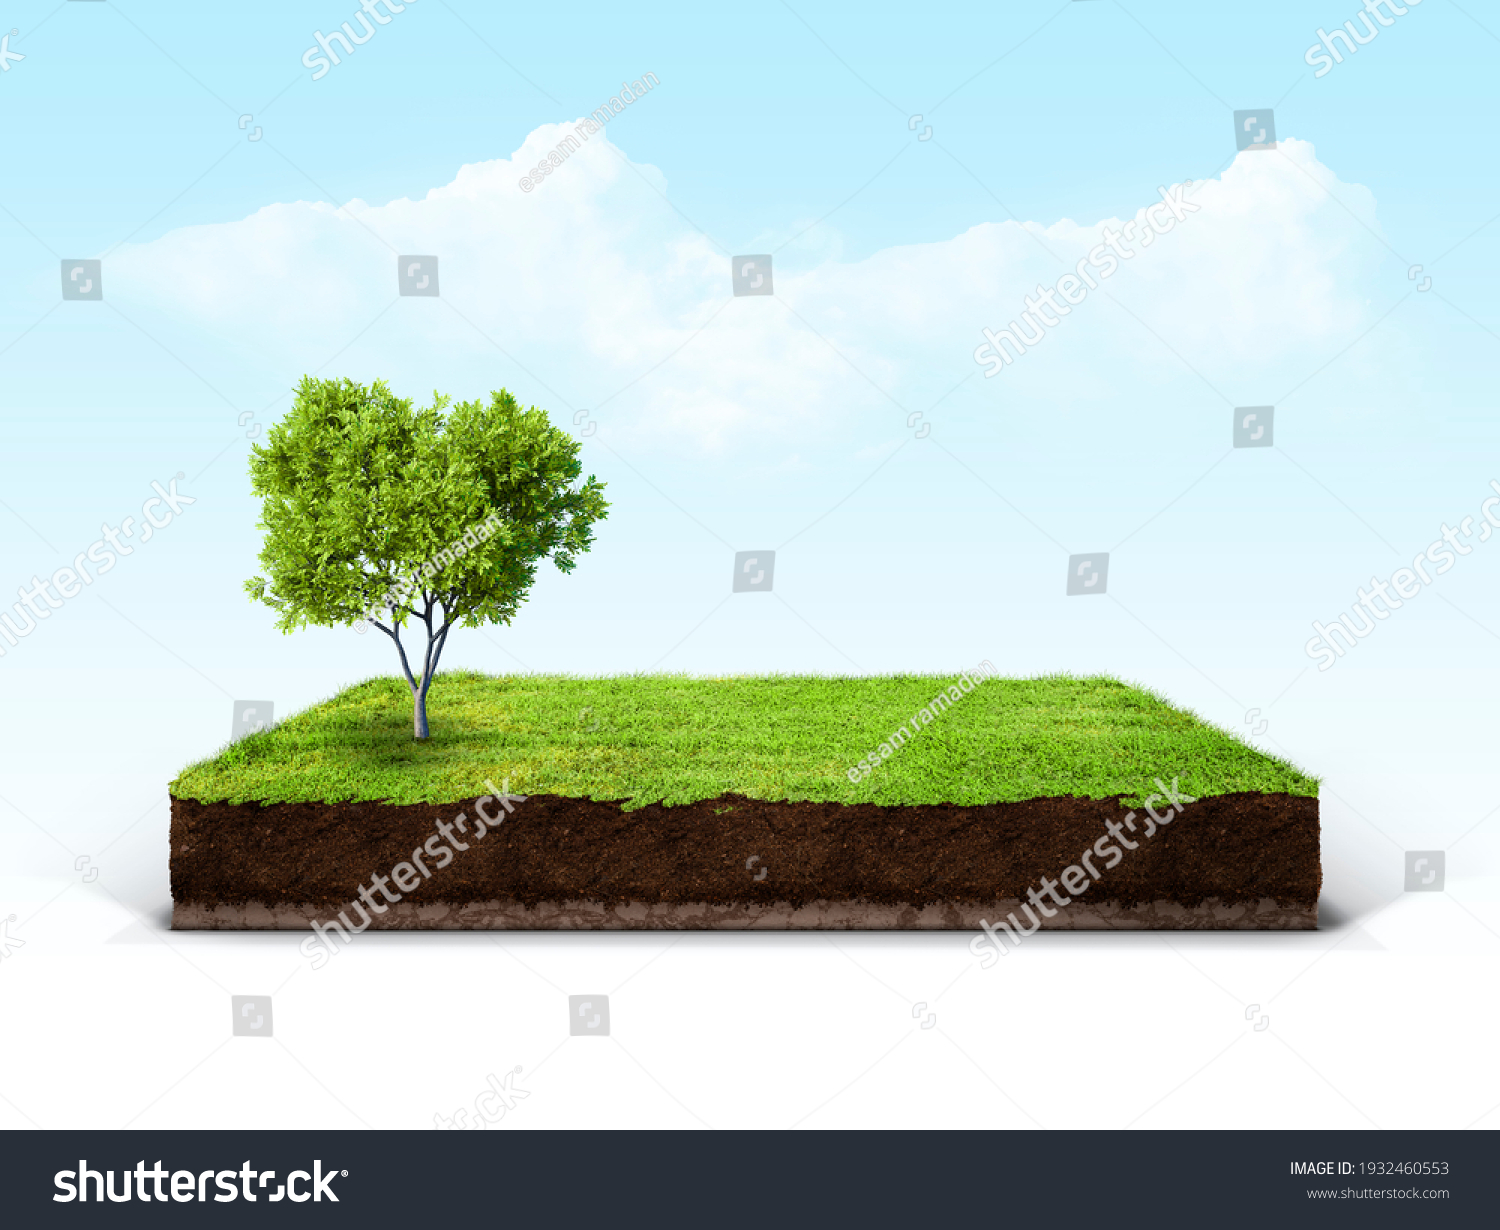 cubical cross section with underground earth soil and green grass on top, cutaway terrain surface with mud and field isolated #1932460553